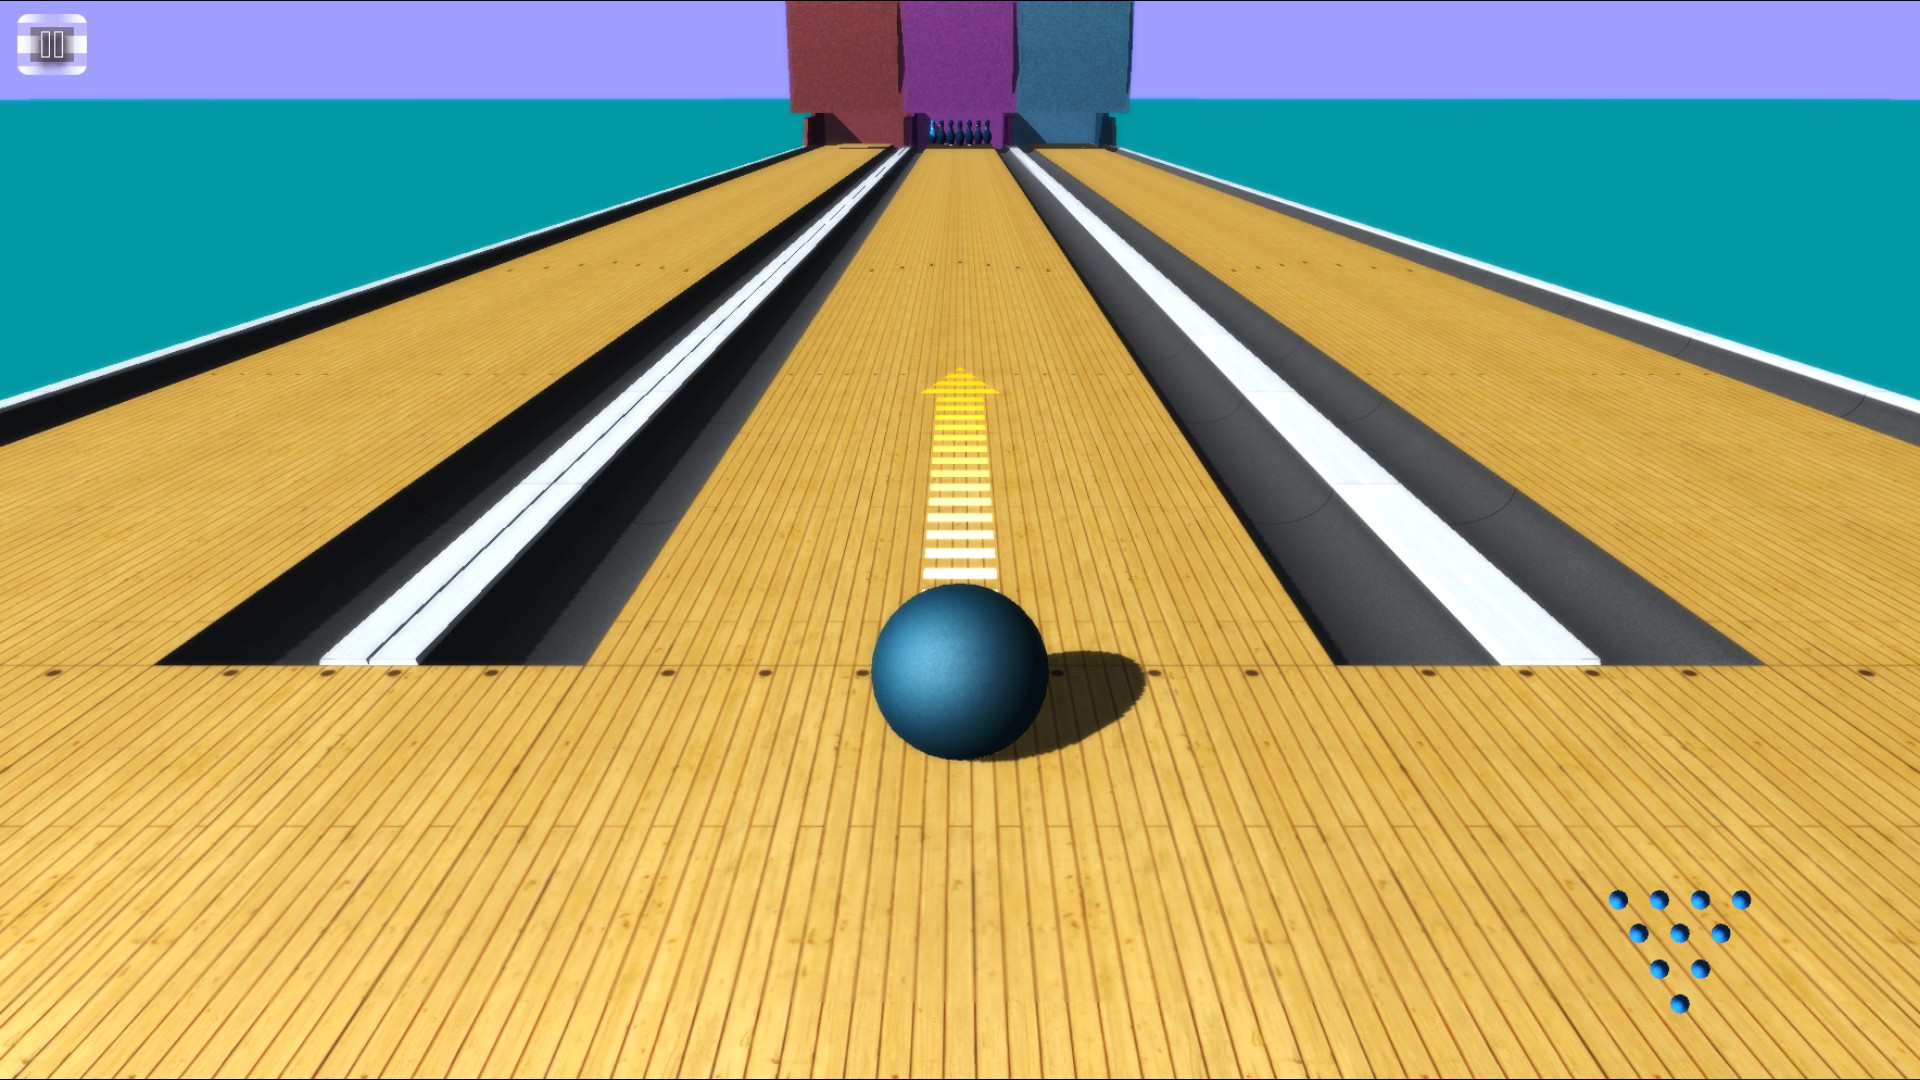 District 112 Incident: Bowling Alley screenshot